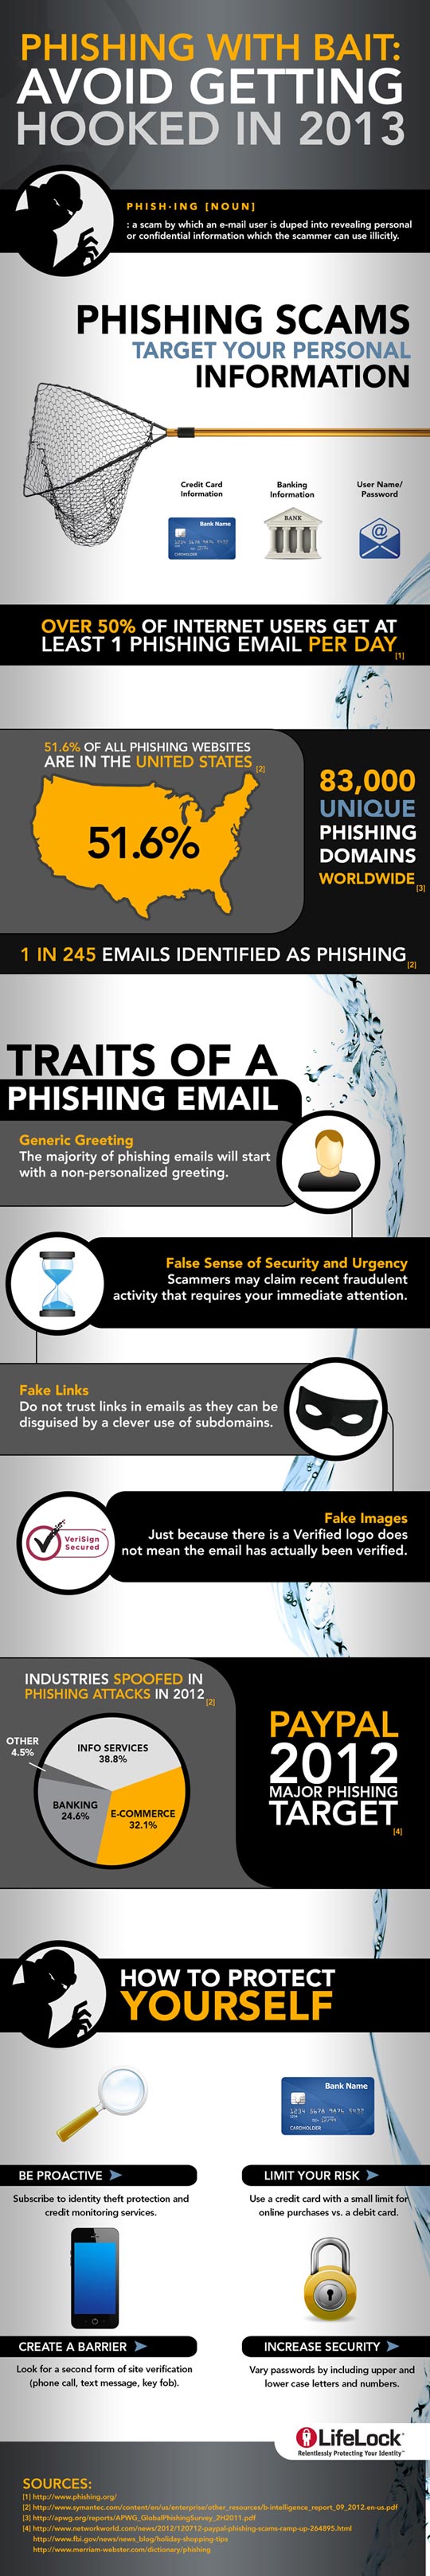 Top 10 Social Media Security Problems In 2013 - Phishing Scams